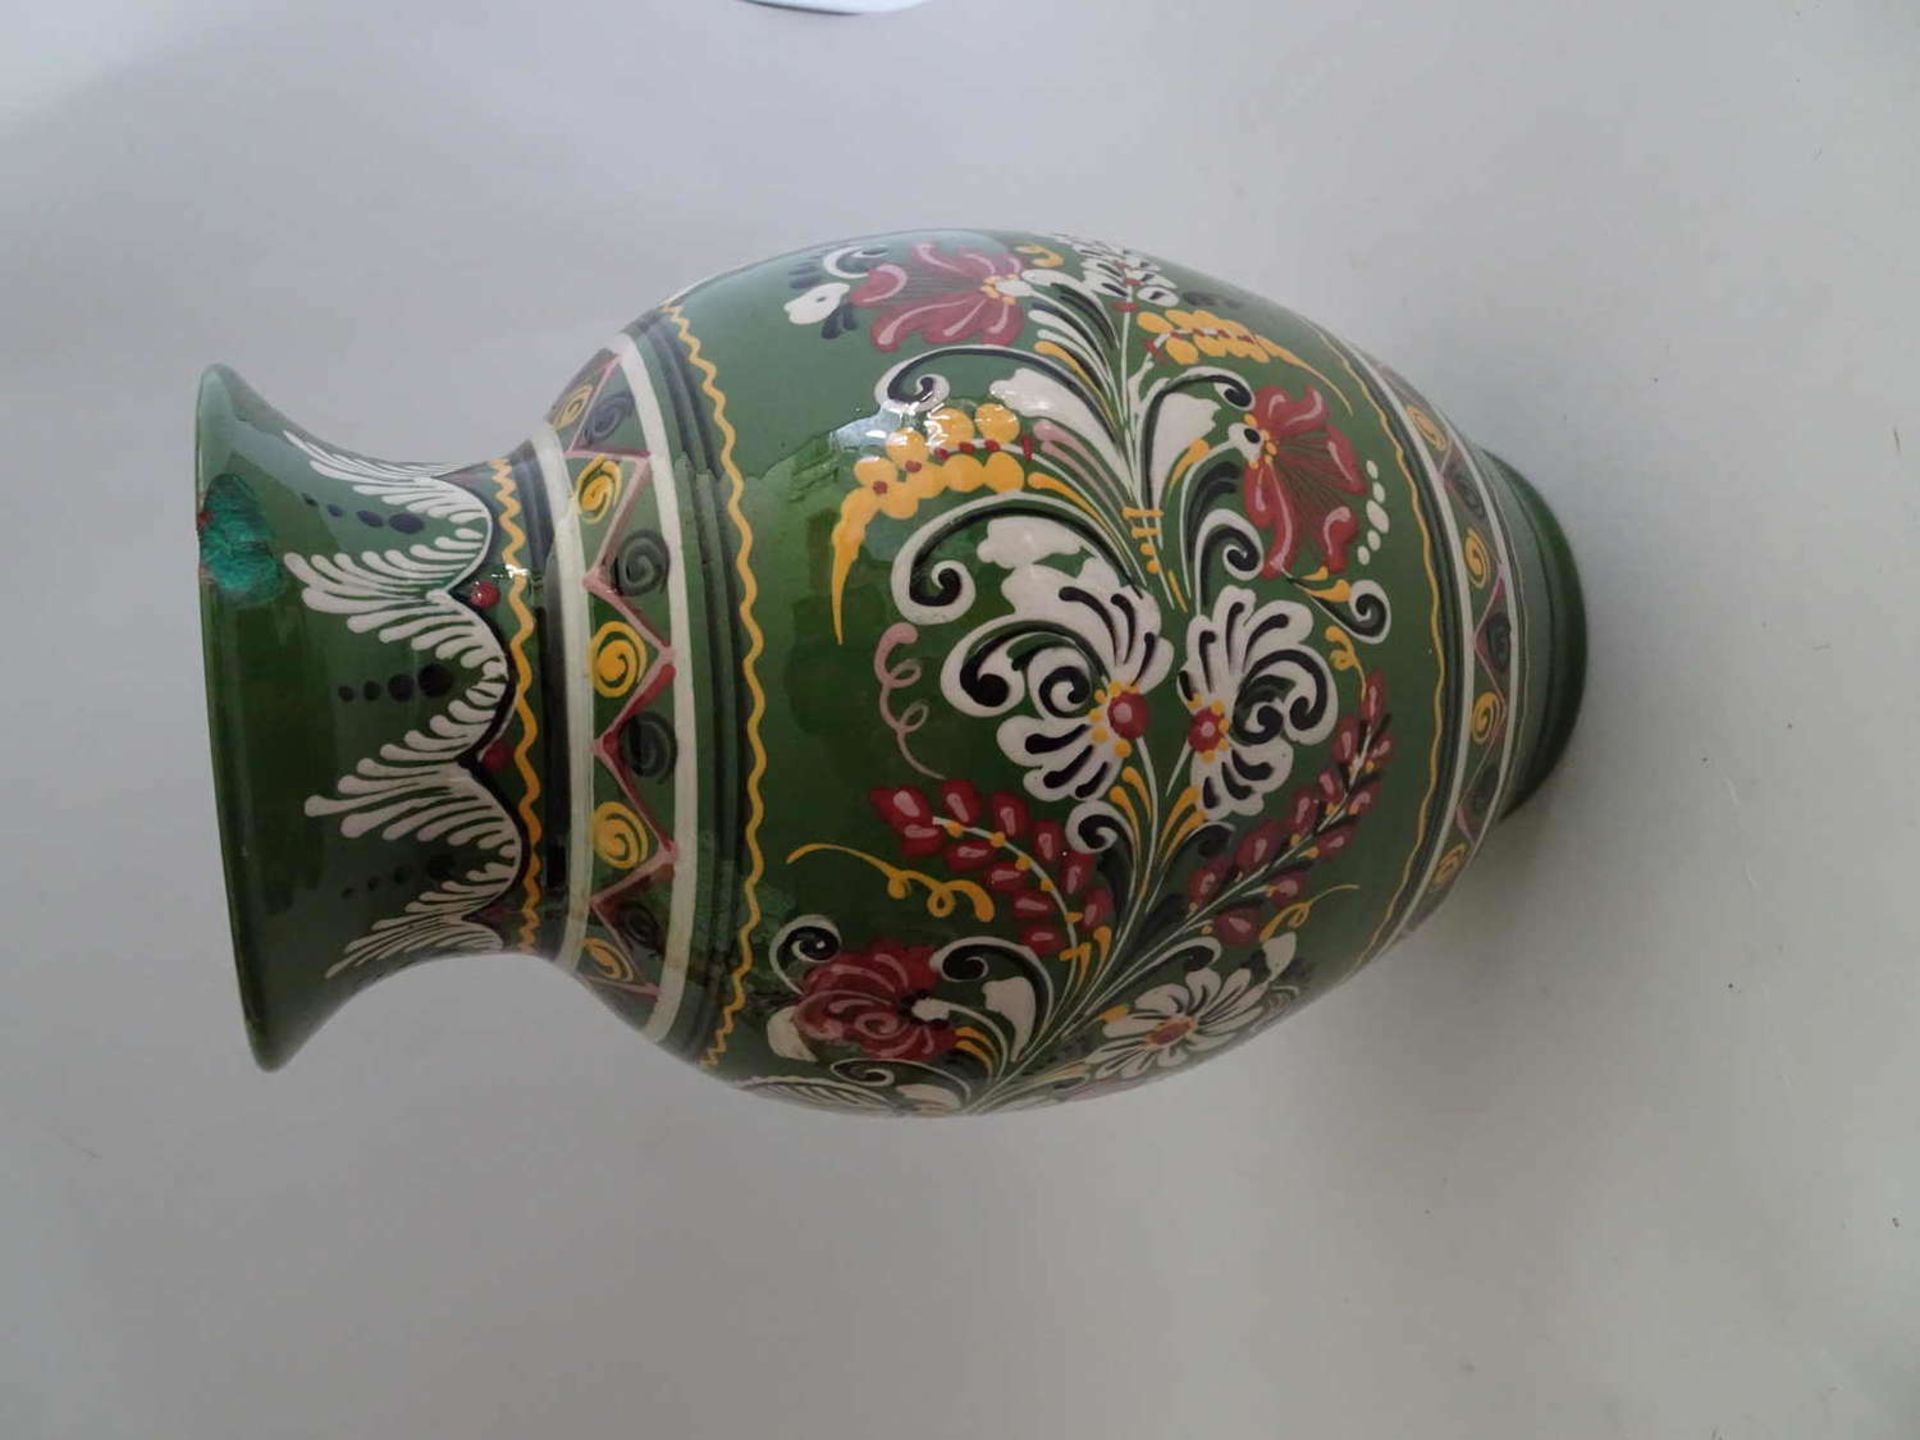 Old ceramic vase with floral decoration, scratched on the floor 71927. At the mouth glaze damage.